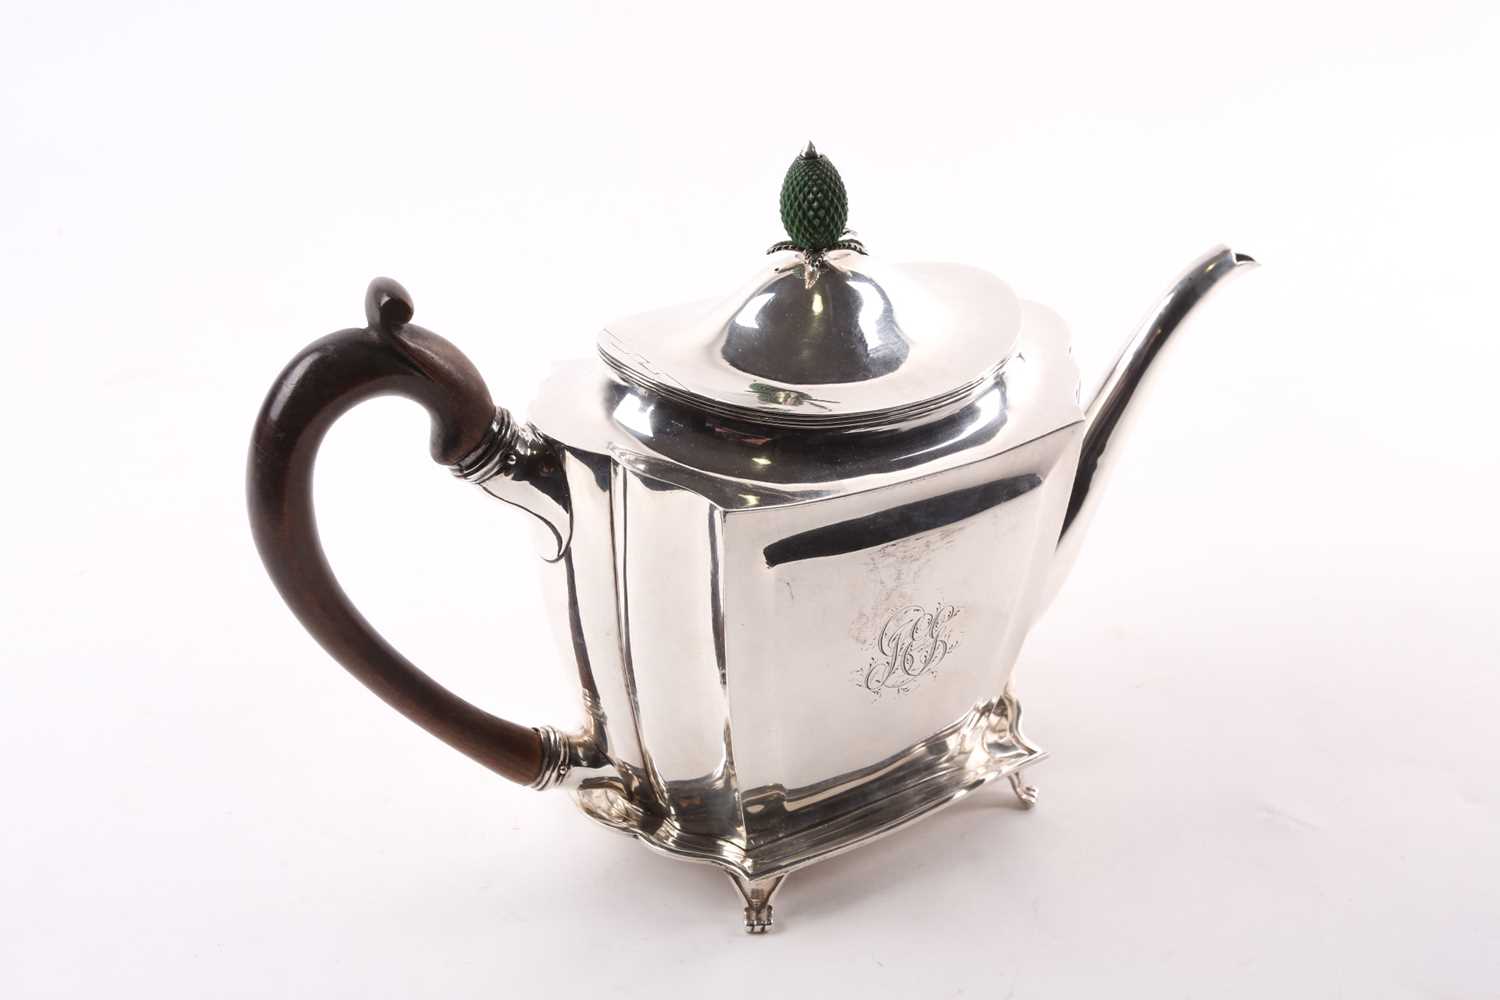 A George III teapot on conforming stand, London 1798 by Charles Chesterman II, the teapot with green